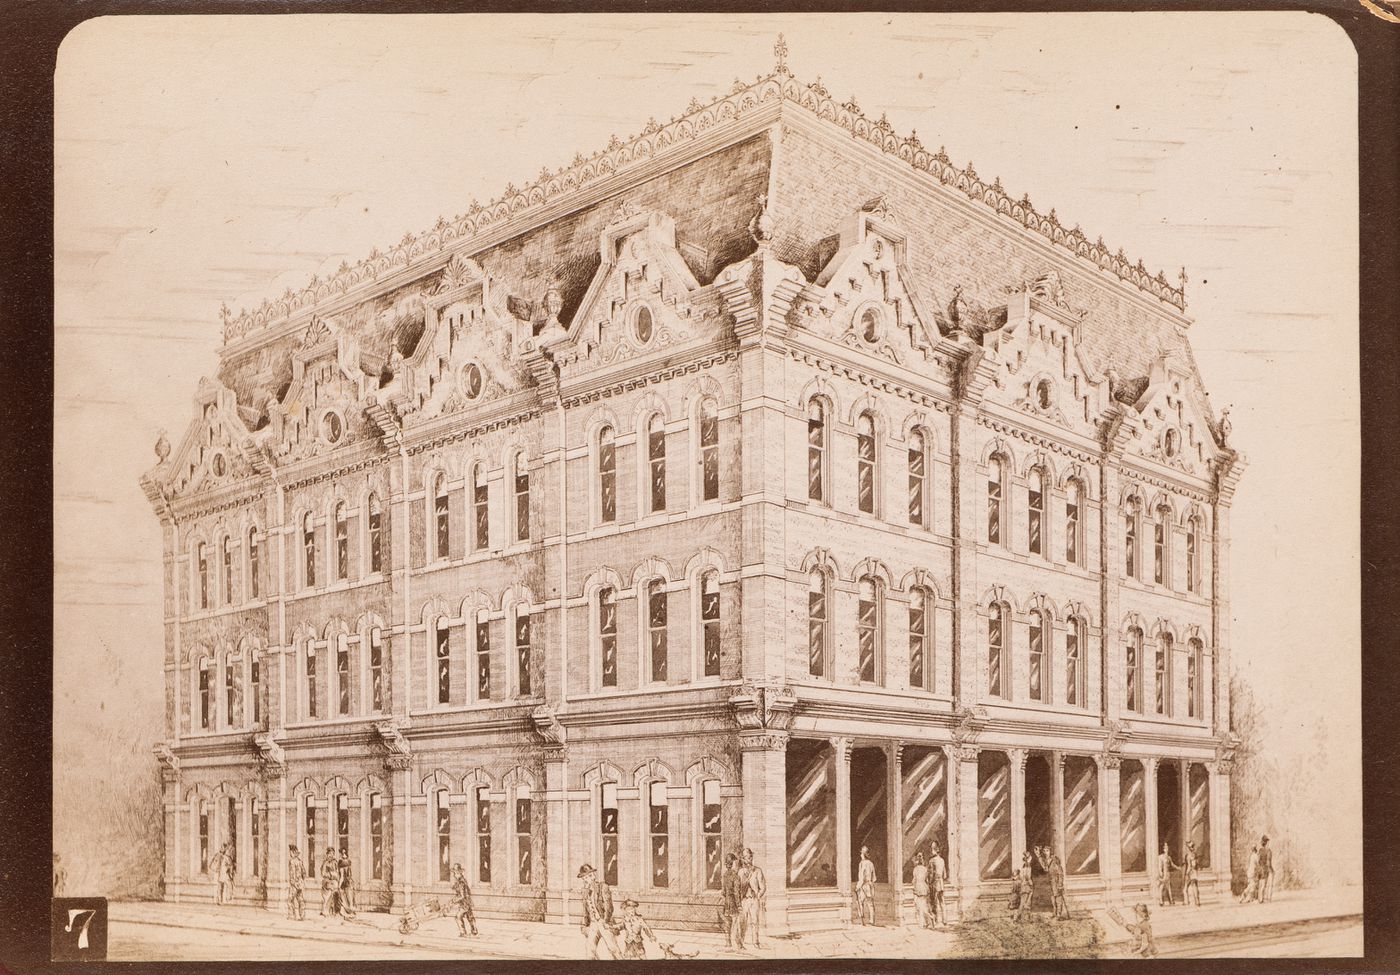 Photograph of a rendering of or for the principal and lateral façades of Bathgate Block, 242-246 Princess Street, Winnipeg, Manitoba, Canada